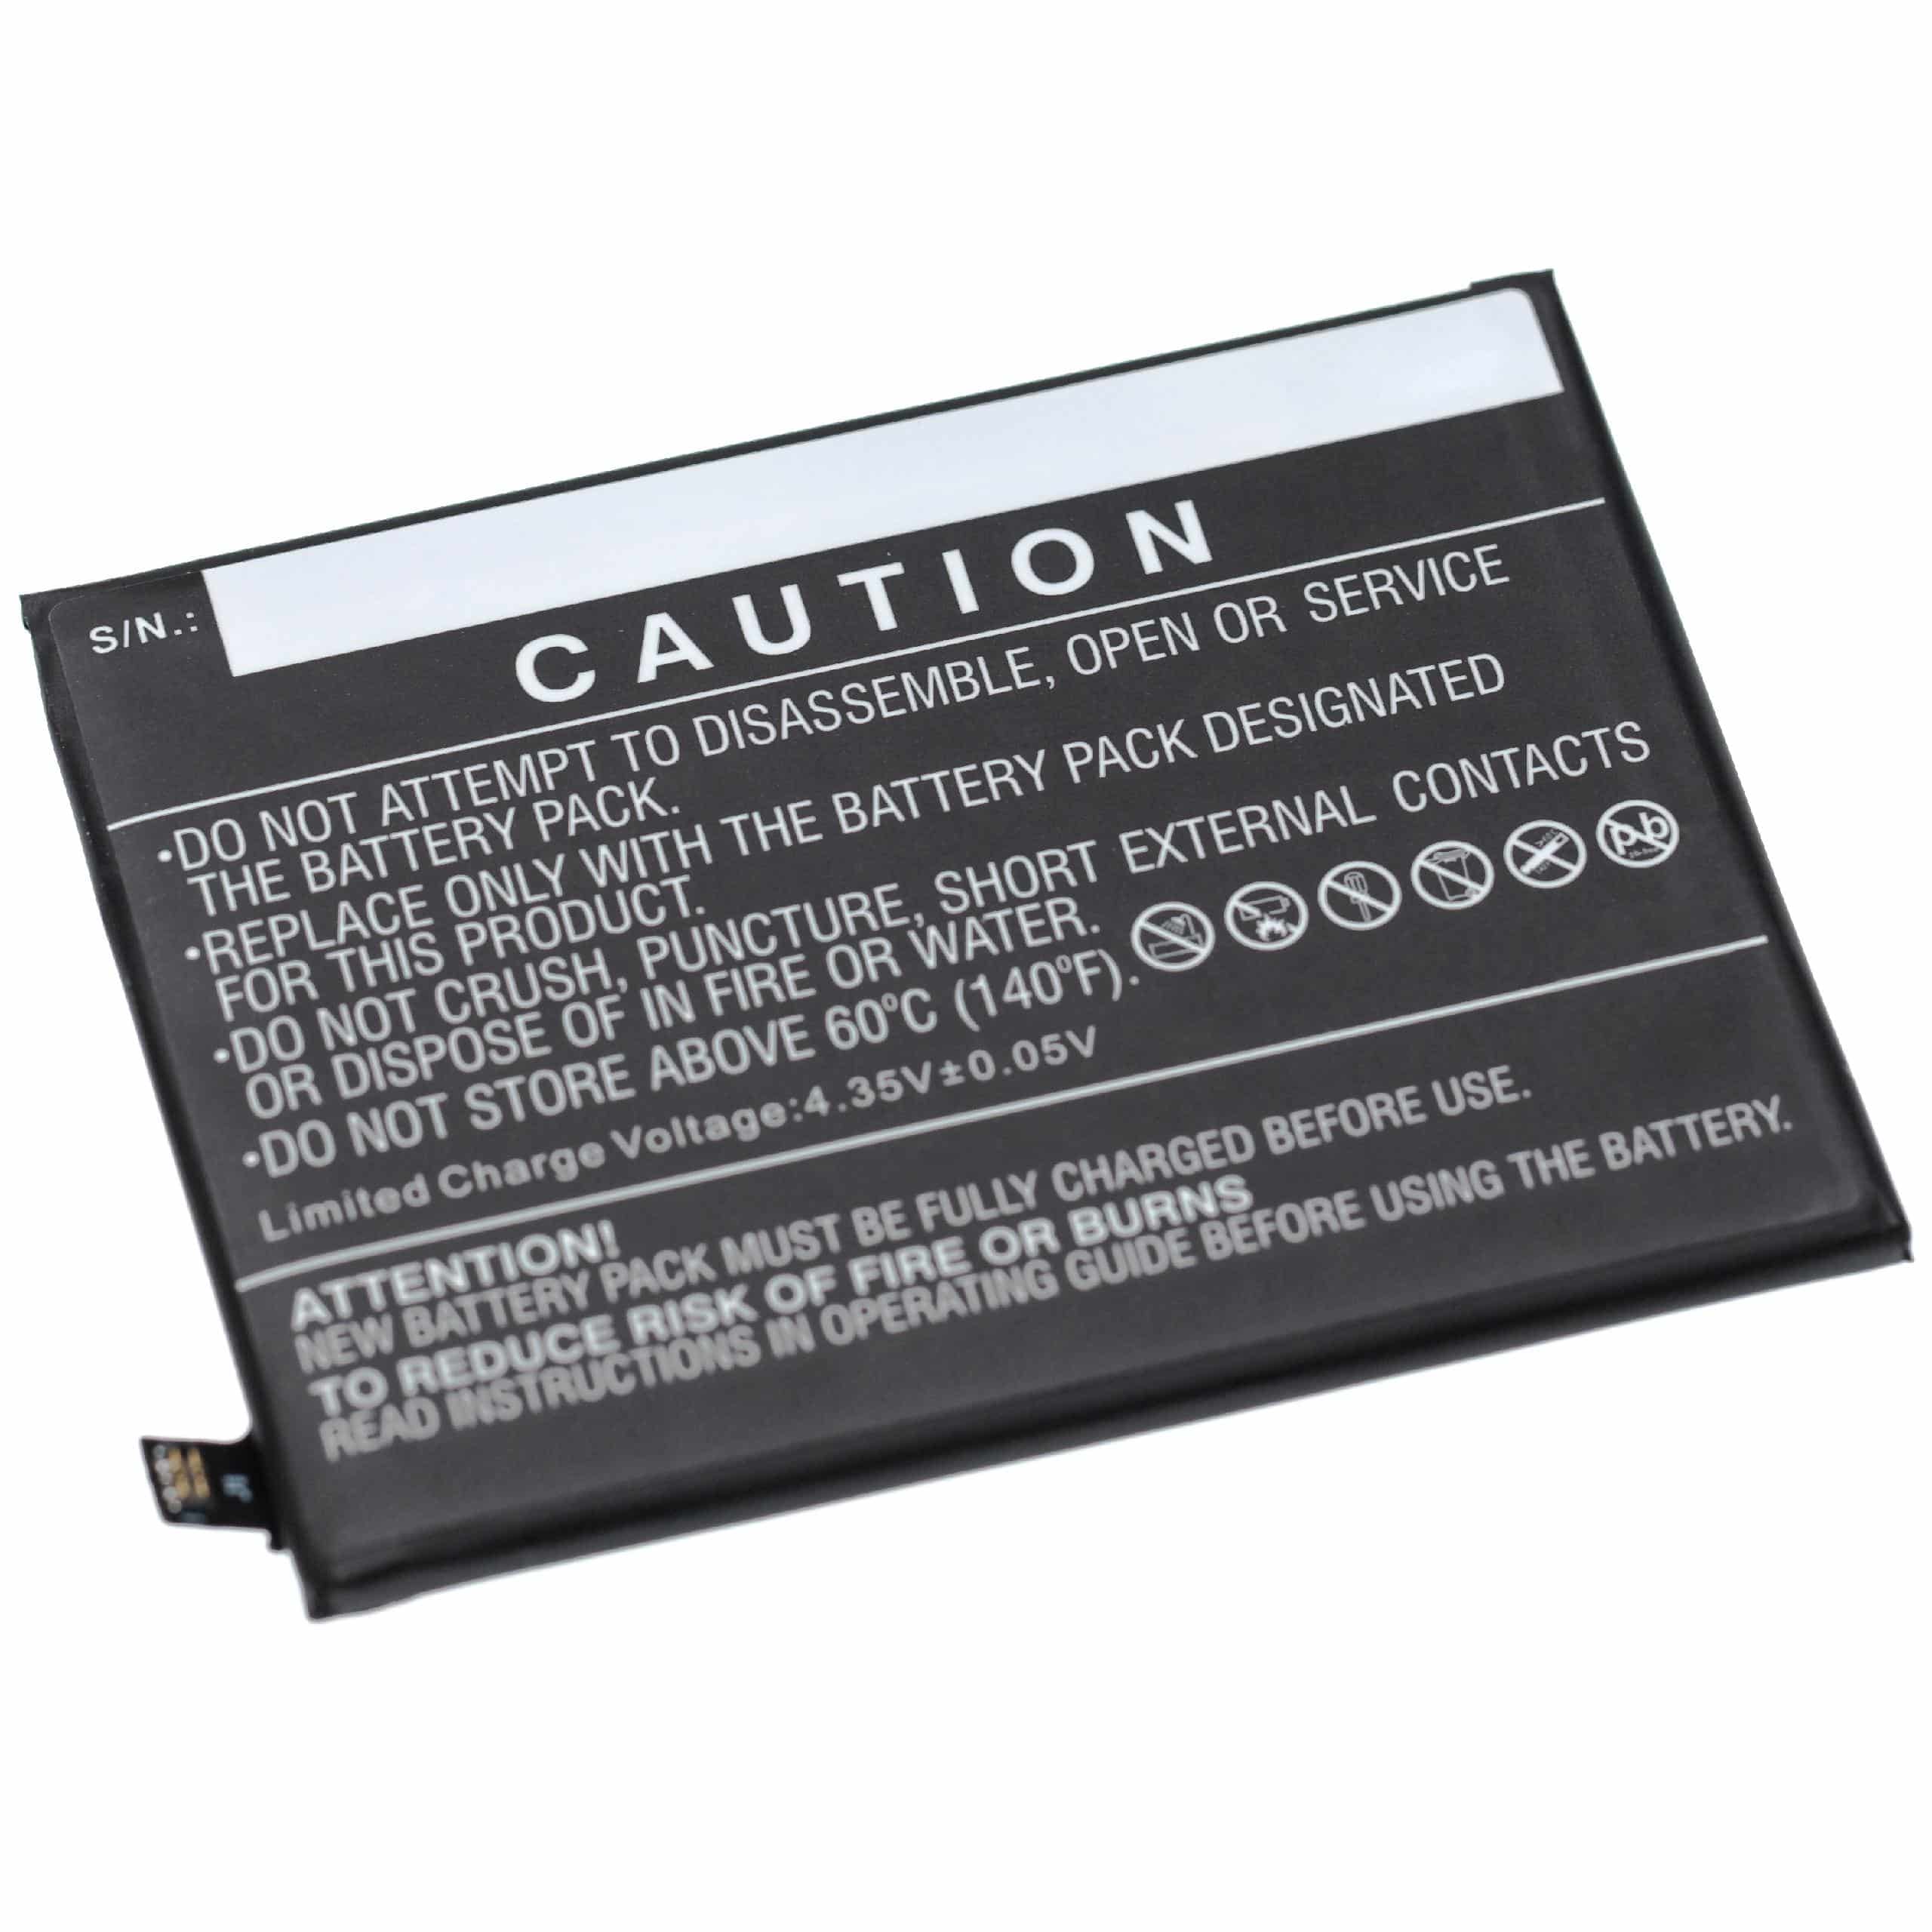 Mobile Phone Battery Replacement for Asus C11P1709 1ICP5/59/76 - 3000mAh 3.8V Li-polymer